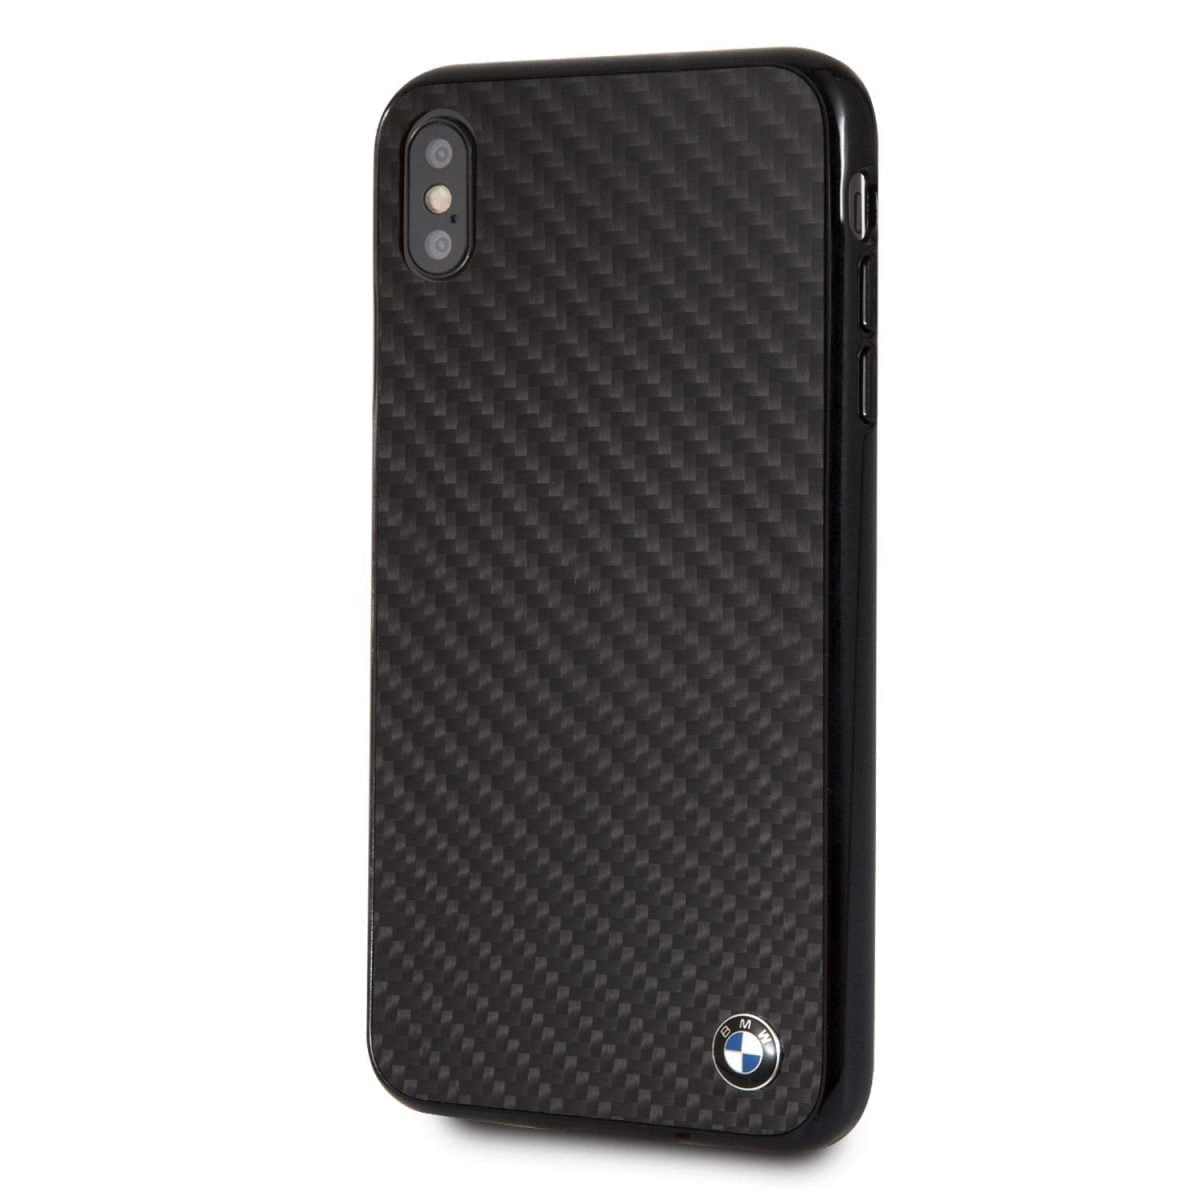 Cg Mobile Bmw Iphone Xs Max Case Black Carbon Hard Cell Phone Case Carbon Fiber Easily Accessible Ports Officially Licensed 01 غطاء آيفون ايفون Xs ماكس ألياف الكربون السوداء (Bmw)